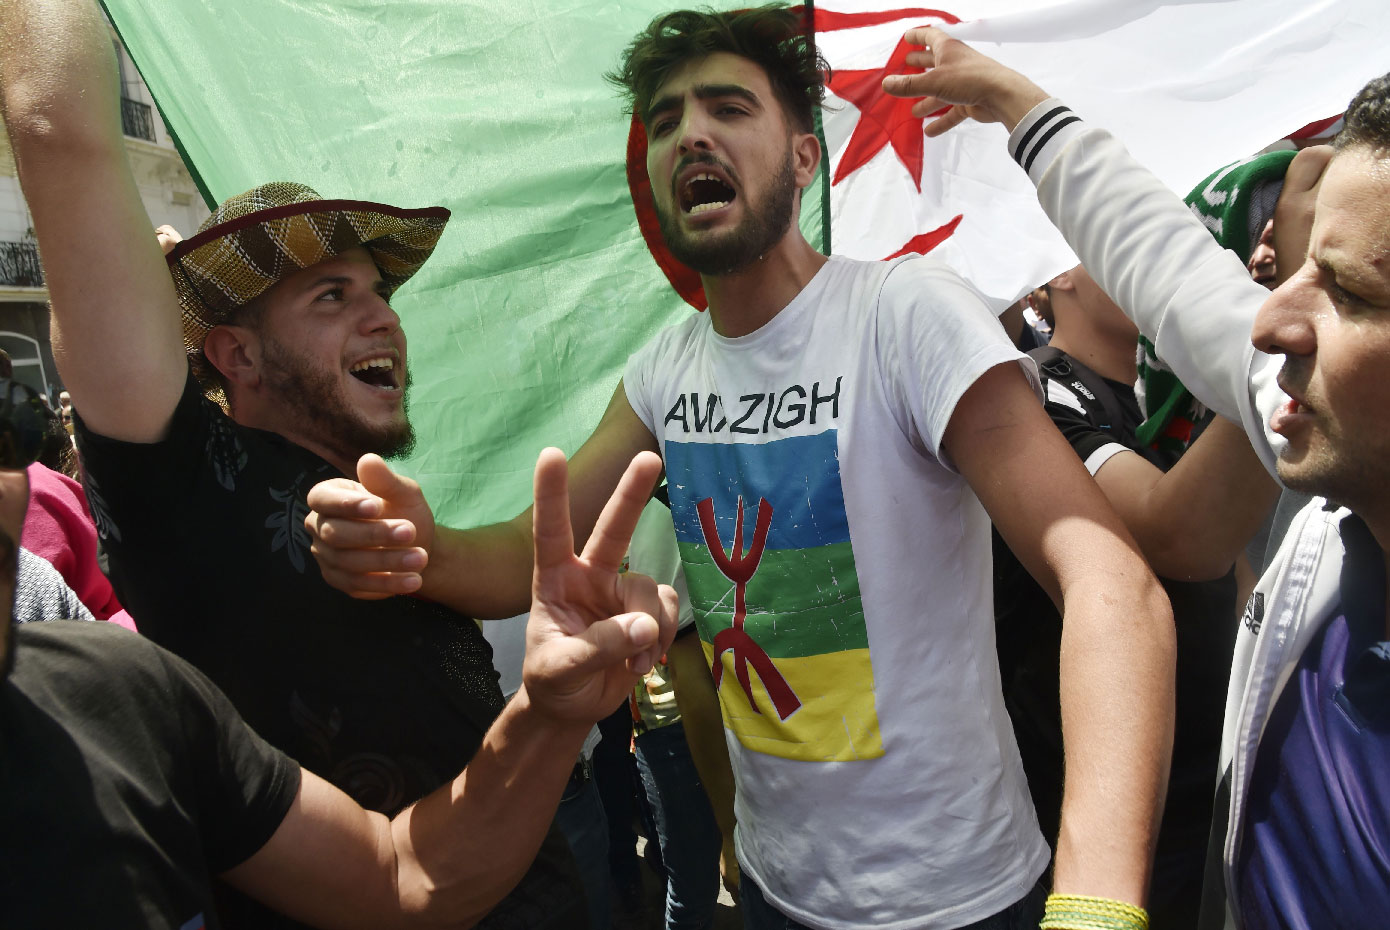 Algerian protesters shout anti-system slogans in front of a national flag during the weekly Friday demonstration in Algiers